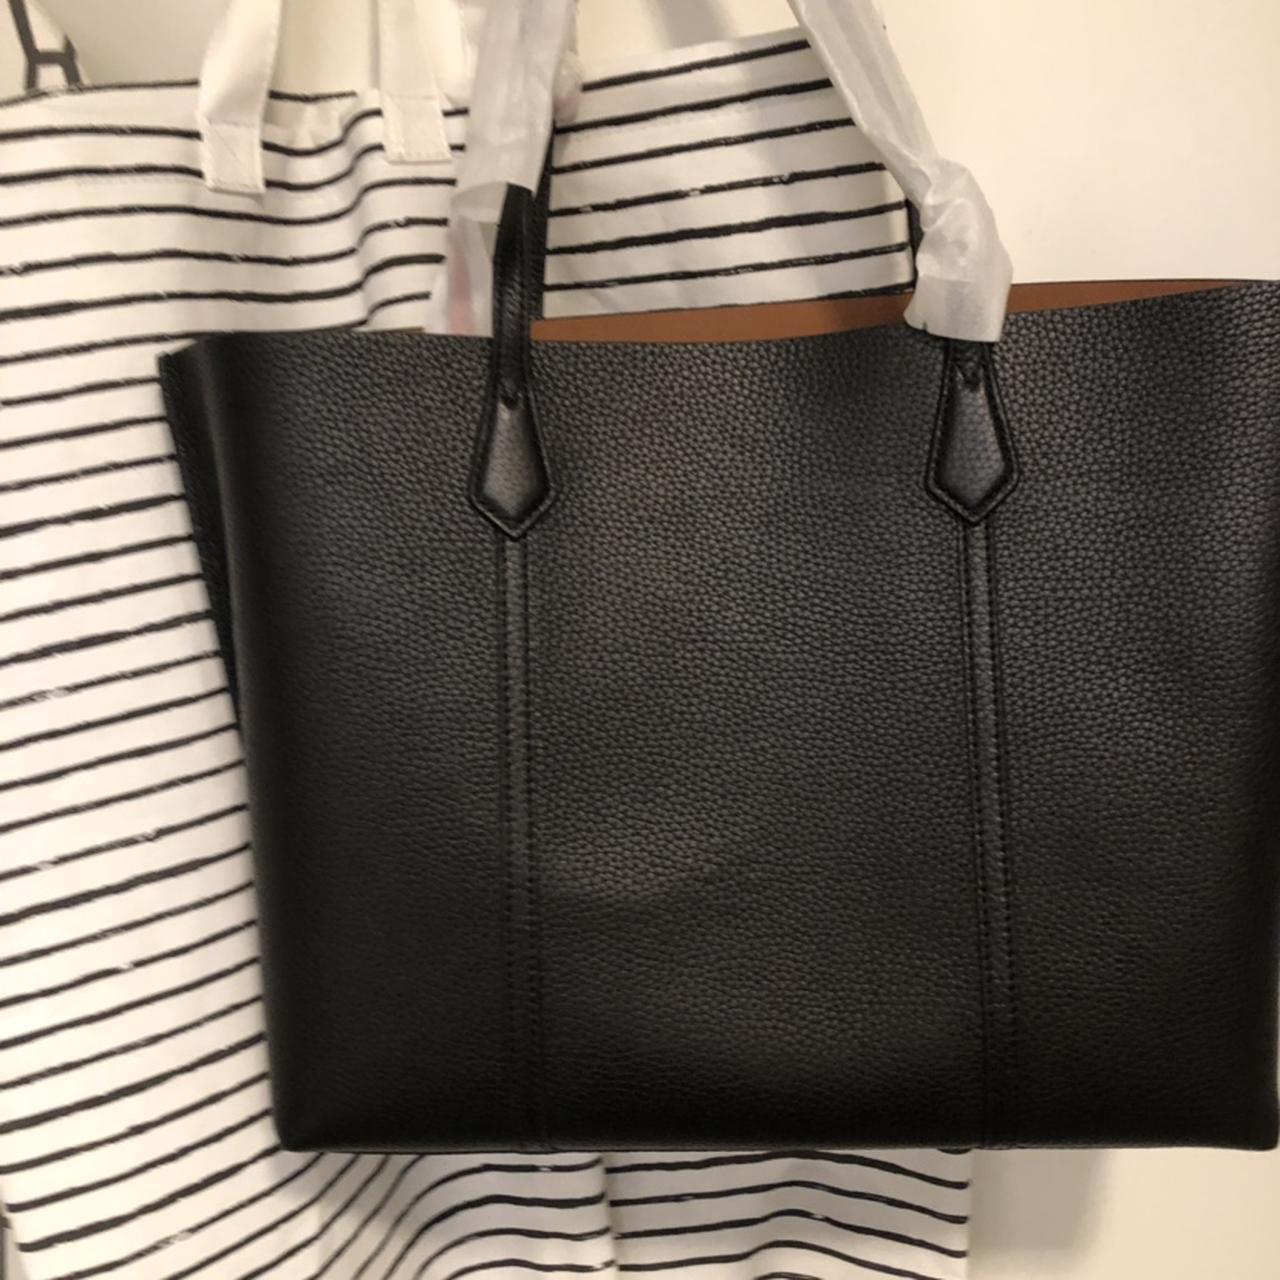 Tory Burch green suede and patent leather tote - Depop